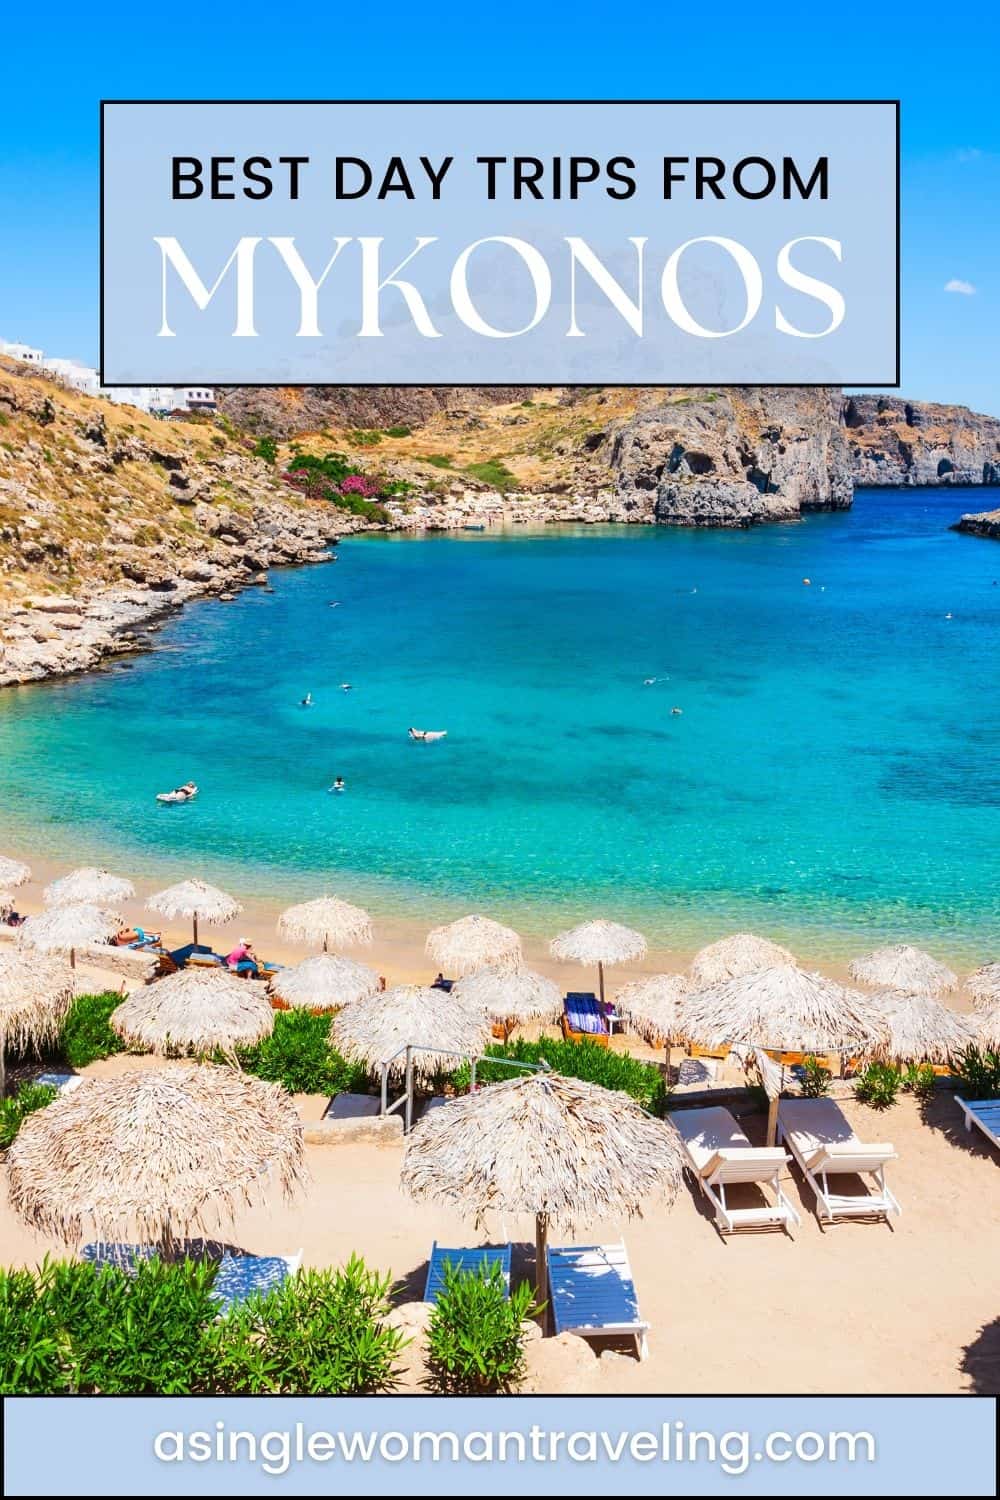 ravel blog graphic showcasing 'Best Day Trips from Mykonos' against an aerial view of a mountainous coastline with a bay embracing a clustered seaside village. The clear blue waters and rugged terrain highlight the natural beauty of the destination. 